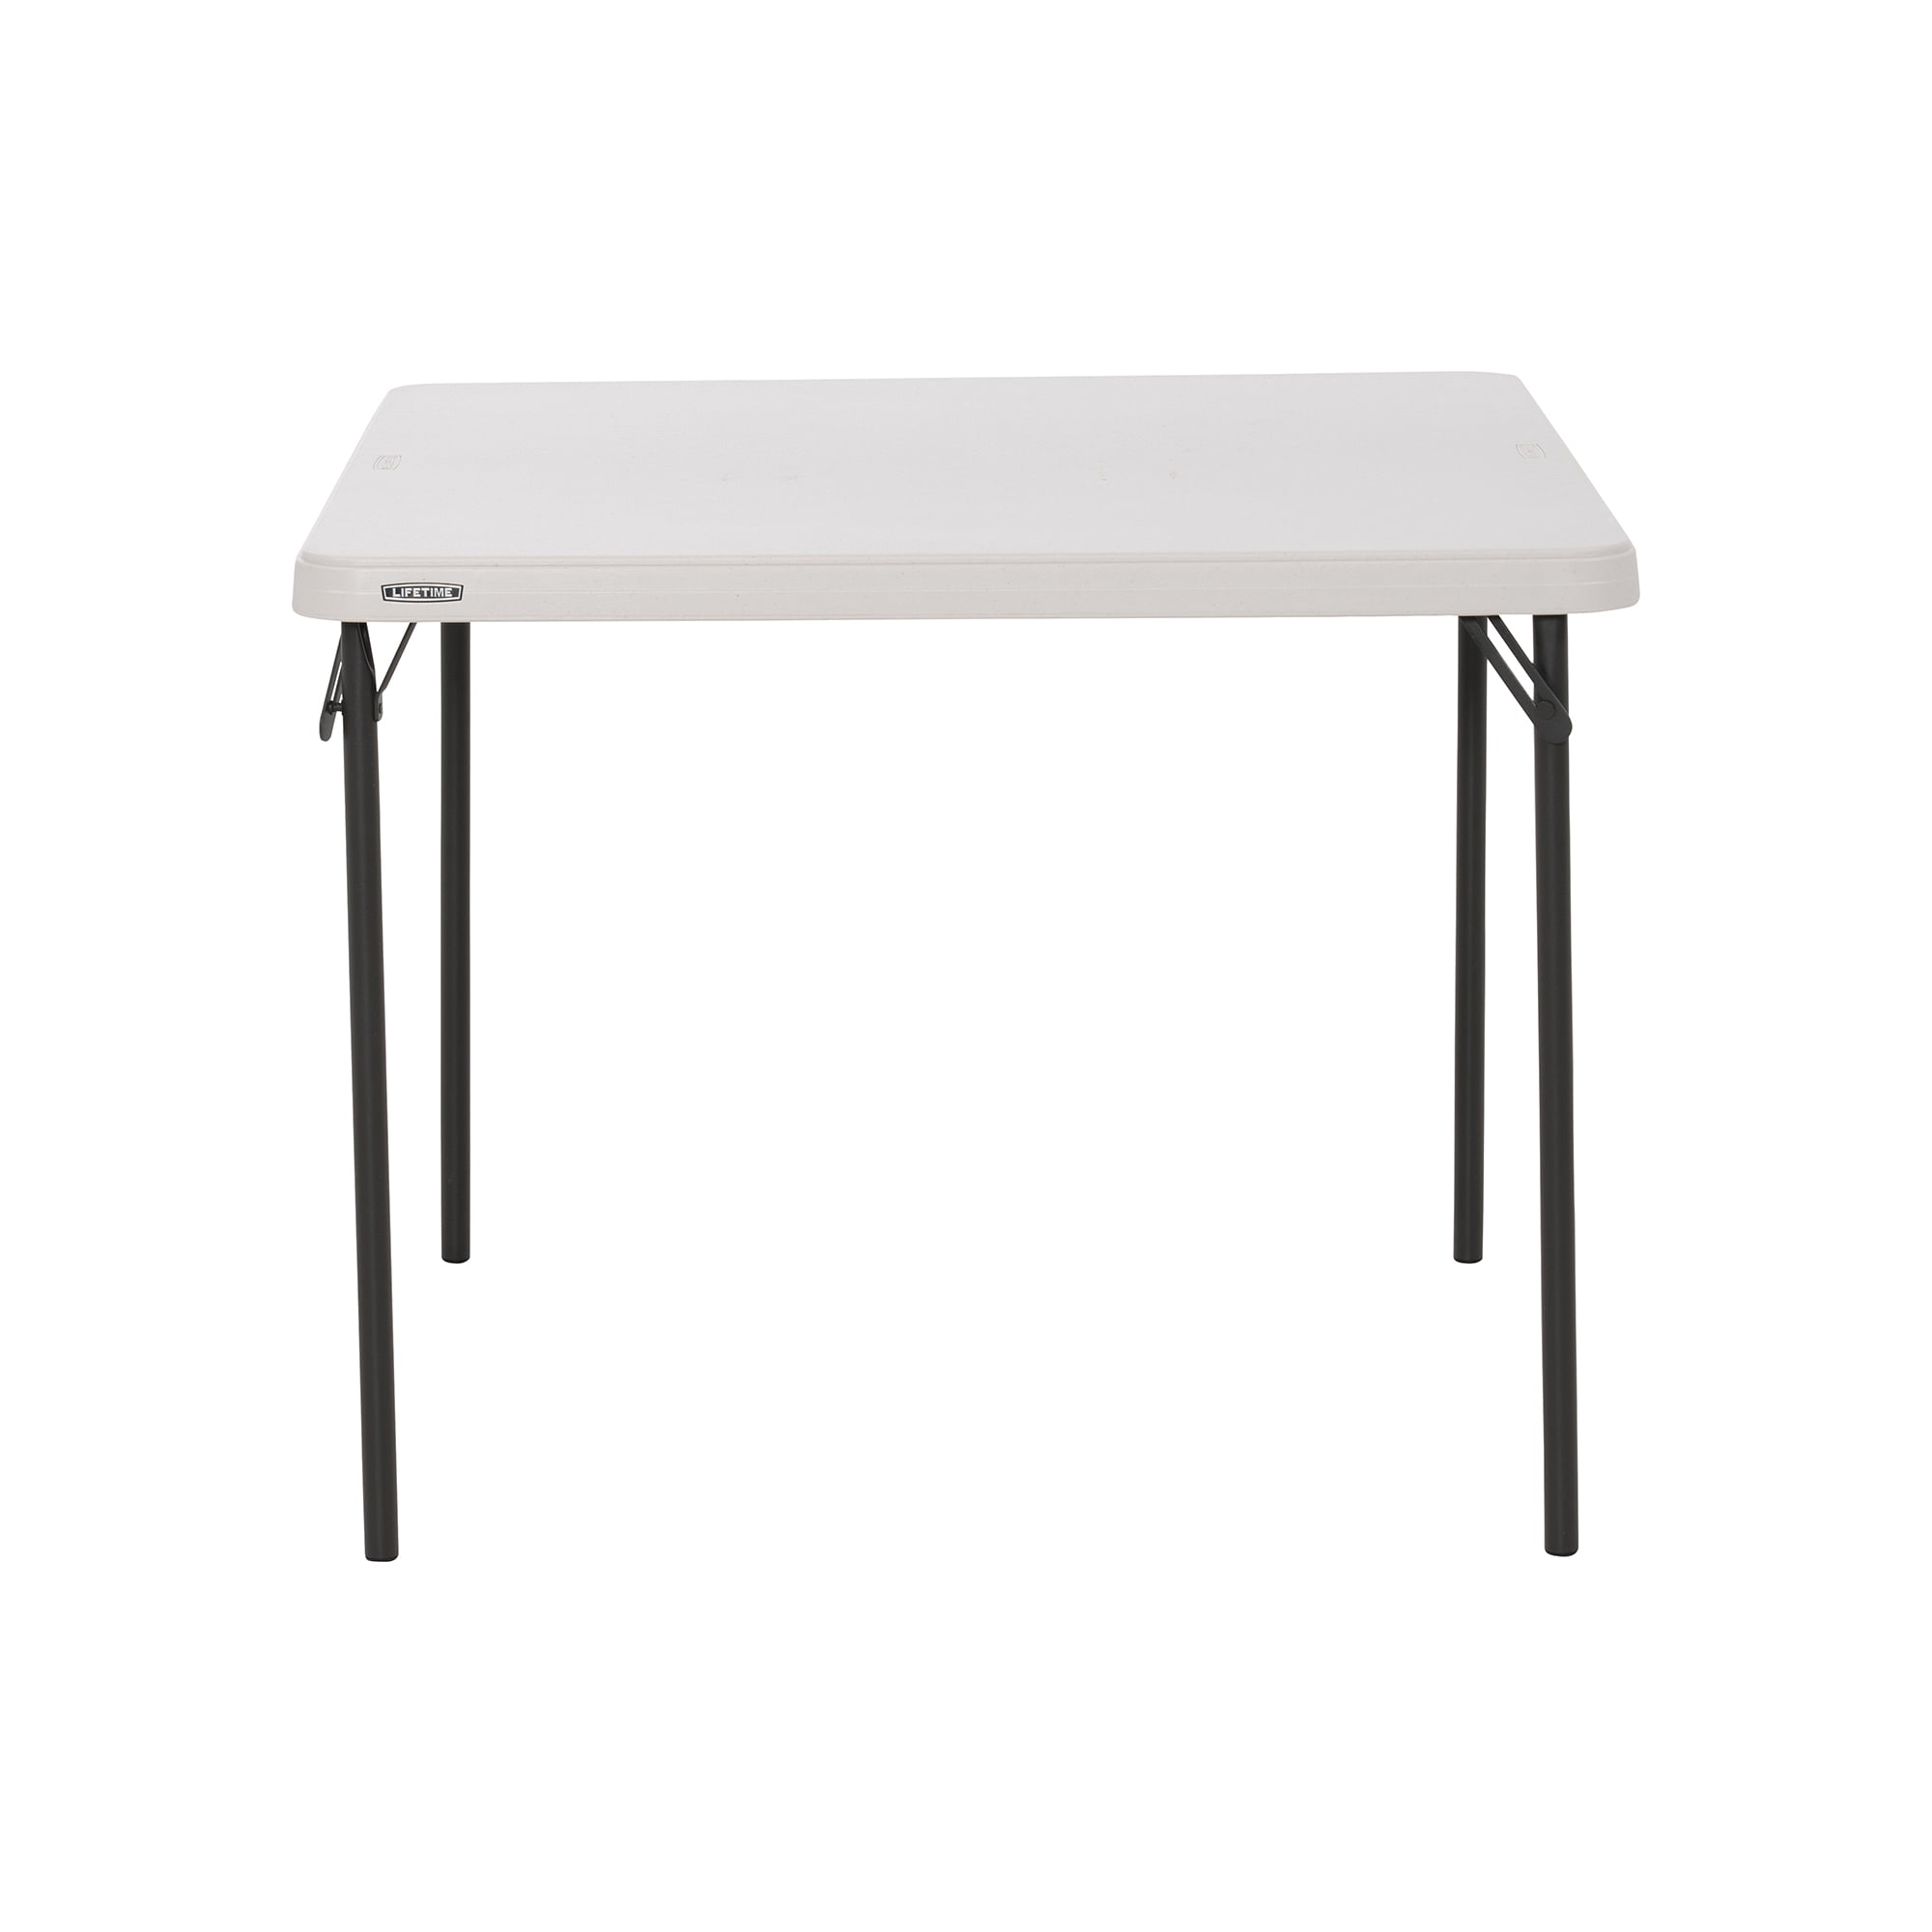 Indoor/Outdoor 37 Lifetime White Commercial Table, Grade, (80783) inch Folding Granite Square